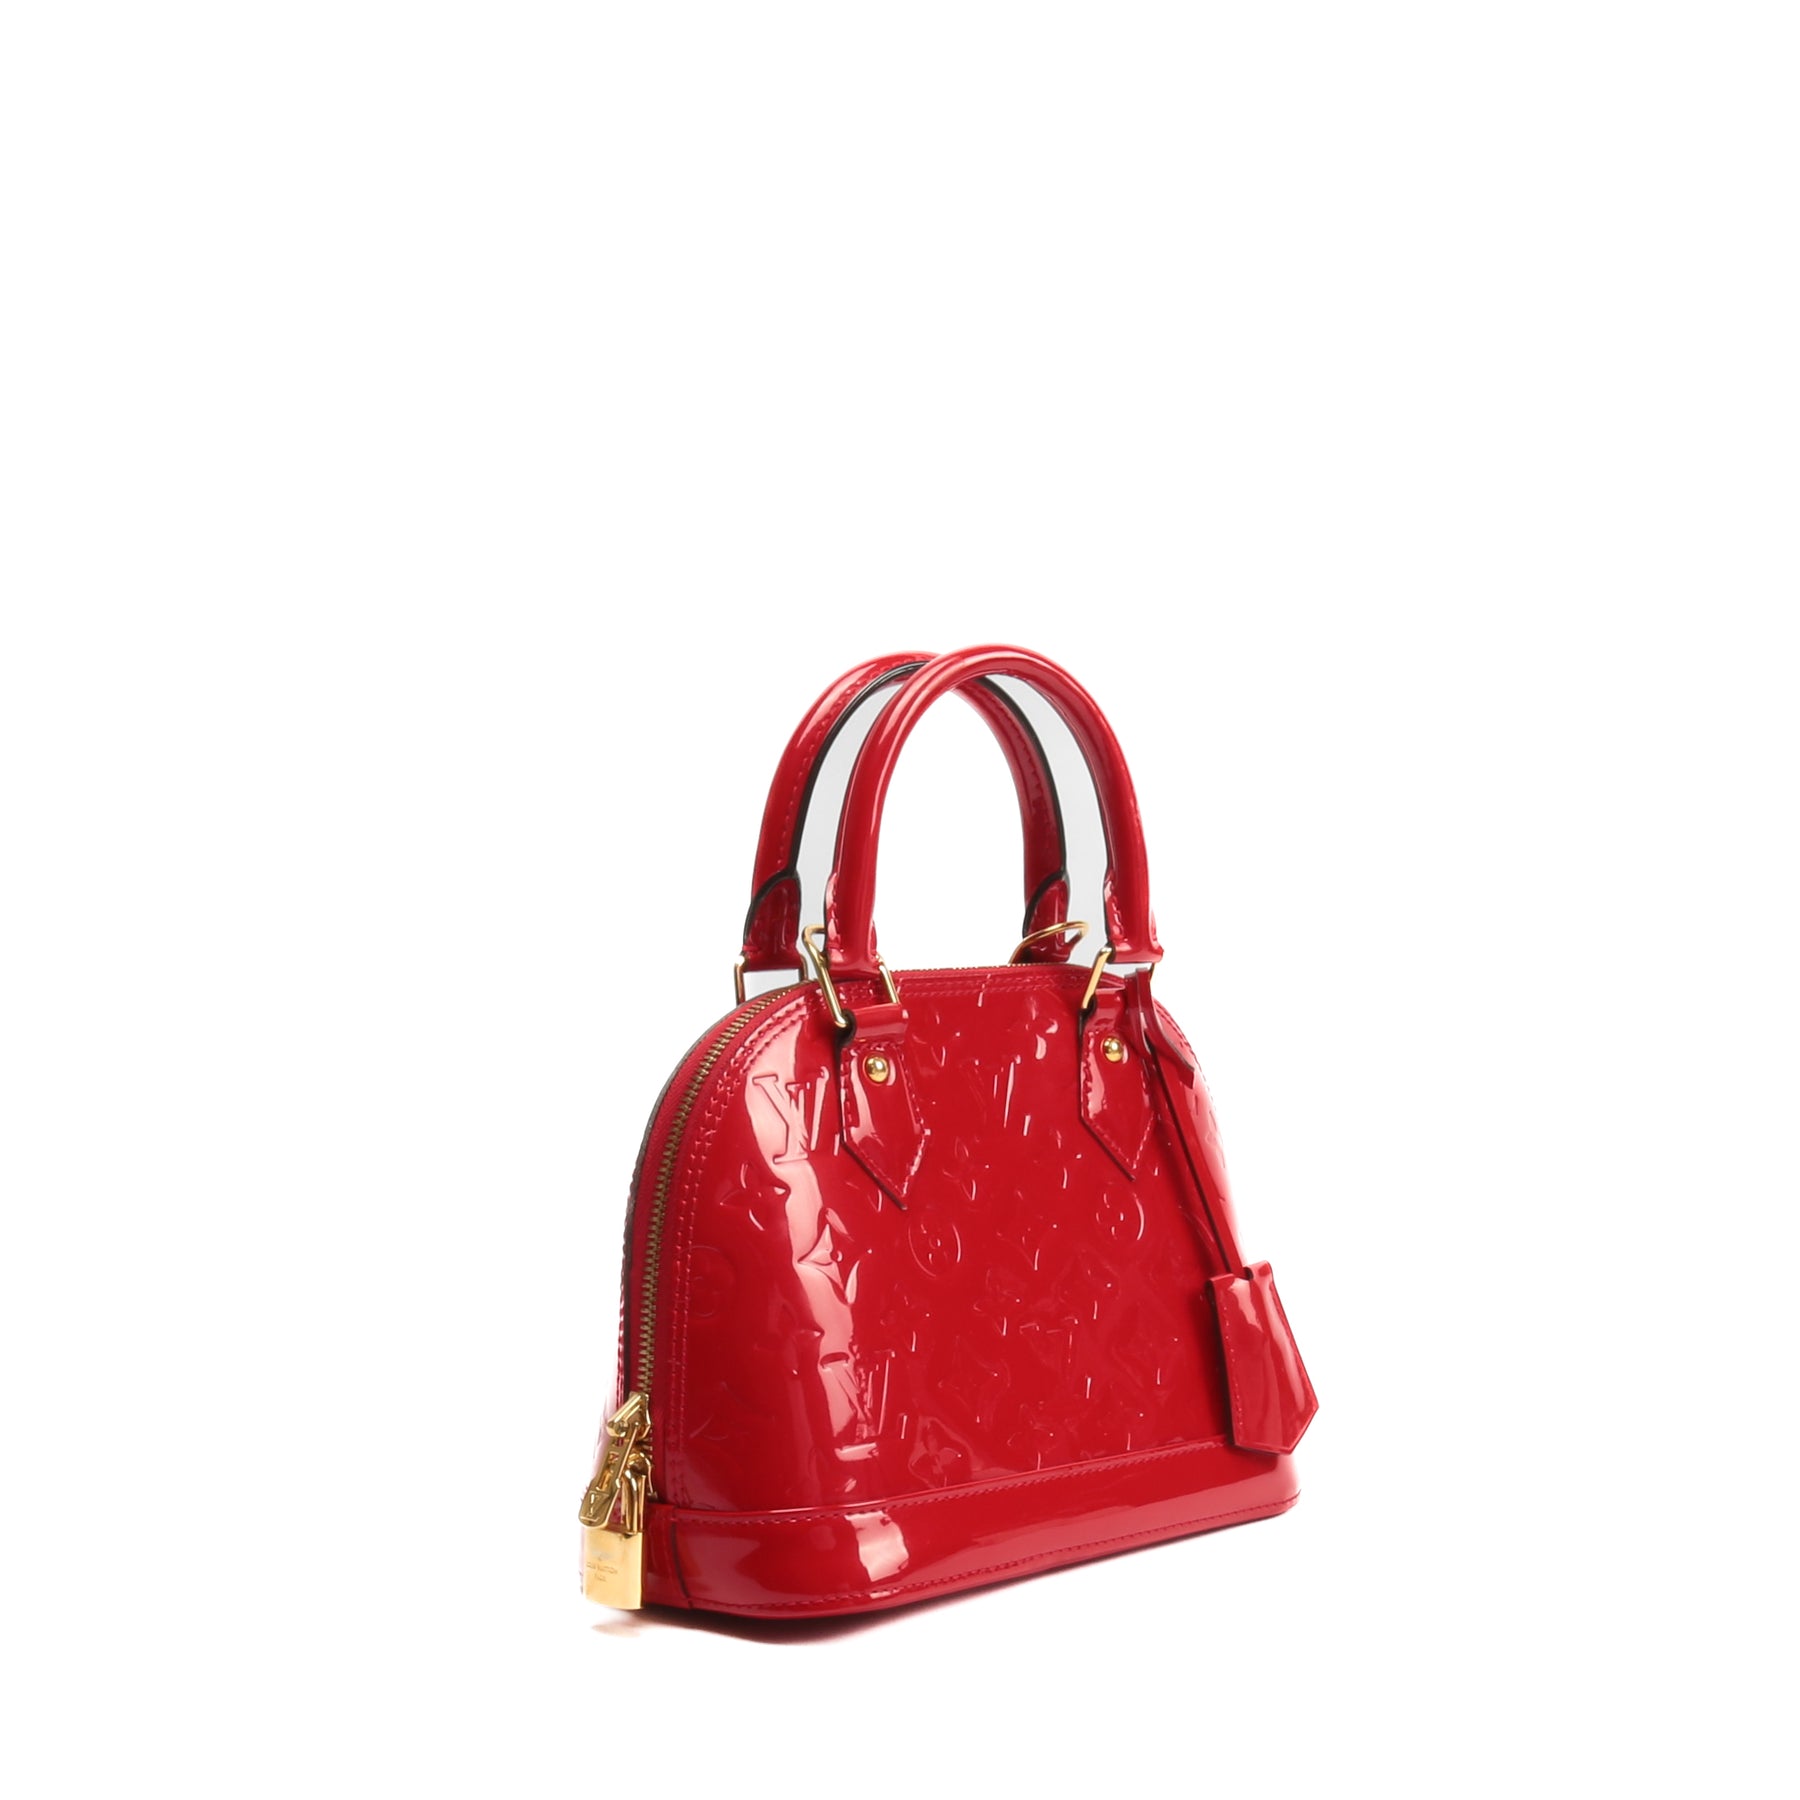 LOUIS VUITTON Vernis Alma MM Pomme D'Amour Red Patent Leather Tote Bag +  Strap